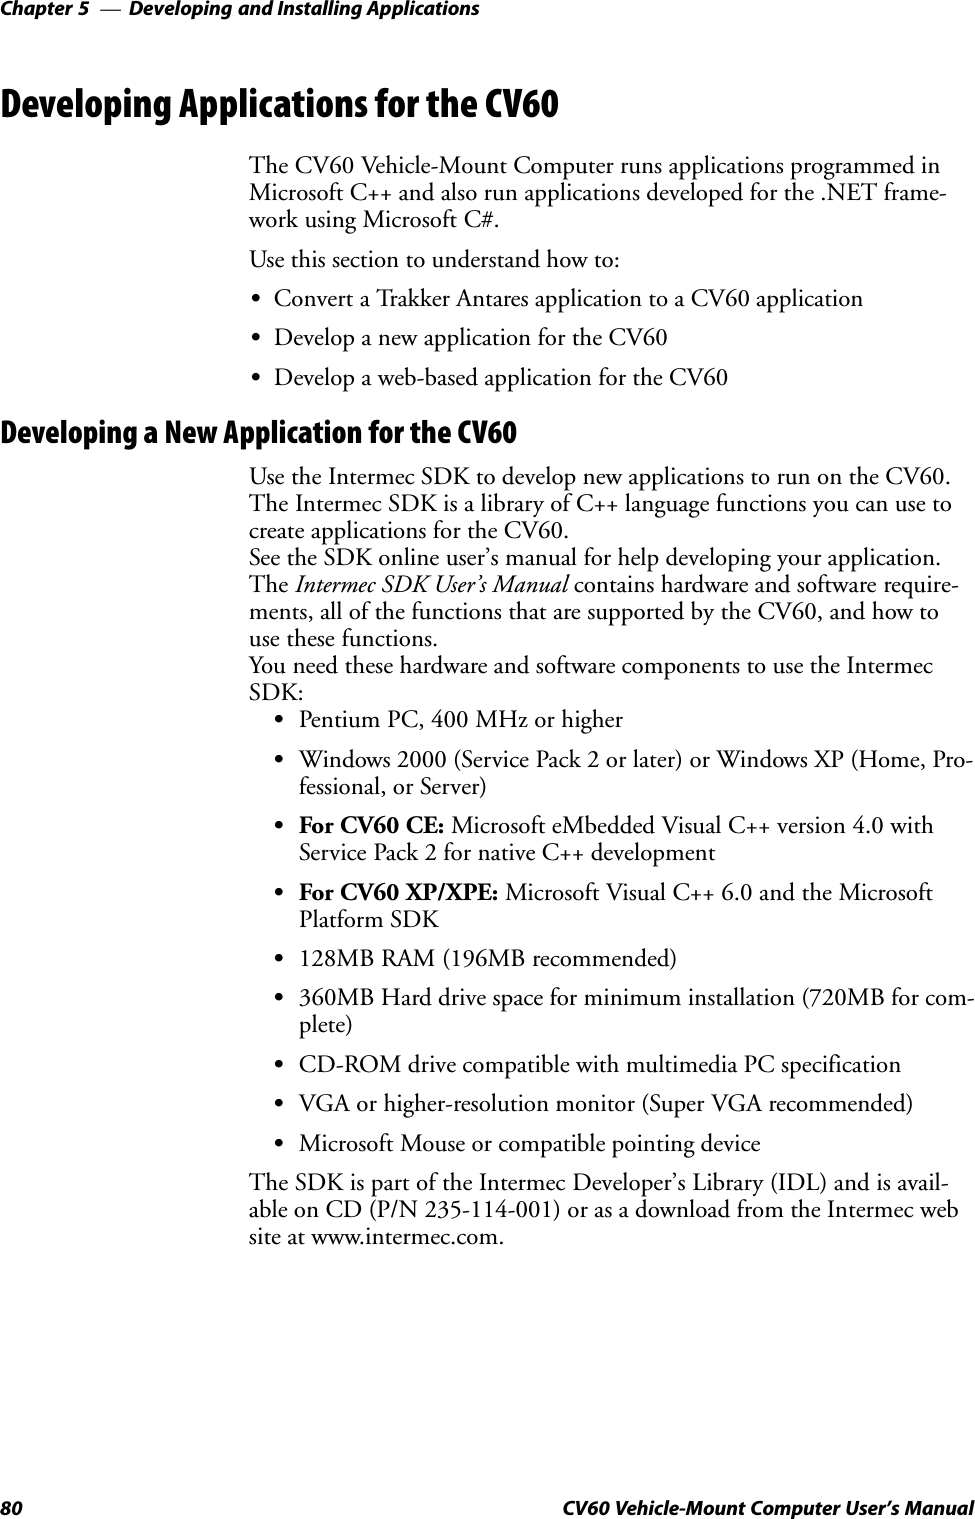 Developing and Installing ApplicationsChapter  —580 CV60 Vehicle-Mount Computer User&apos;s ManualDeveloping Applications for the CV60The CV60 Vehicle-Mount Computer runs applications programmed inMicrosoft C++ and also run applications developed for the .NET frameĆwork using Microsoft C#.Use this section to understand how to:SConvert a Trakker Antares application to a CV60 applicationSDevelop a new application for the CV60SDevelop a web-based application for the CV60Developing a New Application for the CV60Use the Intermec SDK to develop new applications to run on the CV60.The Intermec SDK is a library of C++ language functions you can use tocreate applications for the CV60.See the SDK online user&apos;s manual for help developing your application.The Intermec SDK User&apos;s Manual contains hardware and software requireĆments, all of the functions that are supported by the CV60, and how touse these functions.You need these hardware and software components to use the IntermecSDK:SPentium PC, 400 MHz or higherSWindows 2000 (Service Pack 2 or later) or Windows XP (Home, ProĆfessional, or Server)SFor CV60 CE: Microsoft eMbedded Visual C++ version 4.0 withService Pack 2 for native C++ developmentSFor CV60 XP/XPE: Microsoft Visual C++ 6.0 and the MicrosoftPlatform SDKS128MB RAM (196MB recommended)S360MB Hard drive space for minimum installation (720MB for comĆplete)SCD-ROM drive compatible with multimedia PC specificationSVGA or higher-resolution monitor (Super VGA recommended)SMicrosoft Mouse or compatible pointing deviceThe SDK is part of the Intermec Developer&apos;s Library (IDL) and is availĆable on CD (P/N 235-114-001) or as a download from the Intermec website at www.intermec.com.